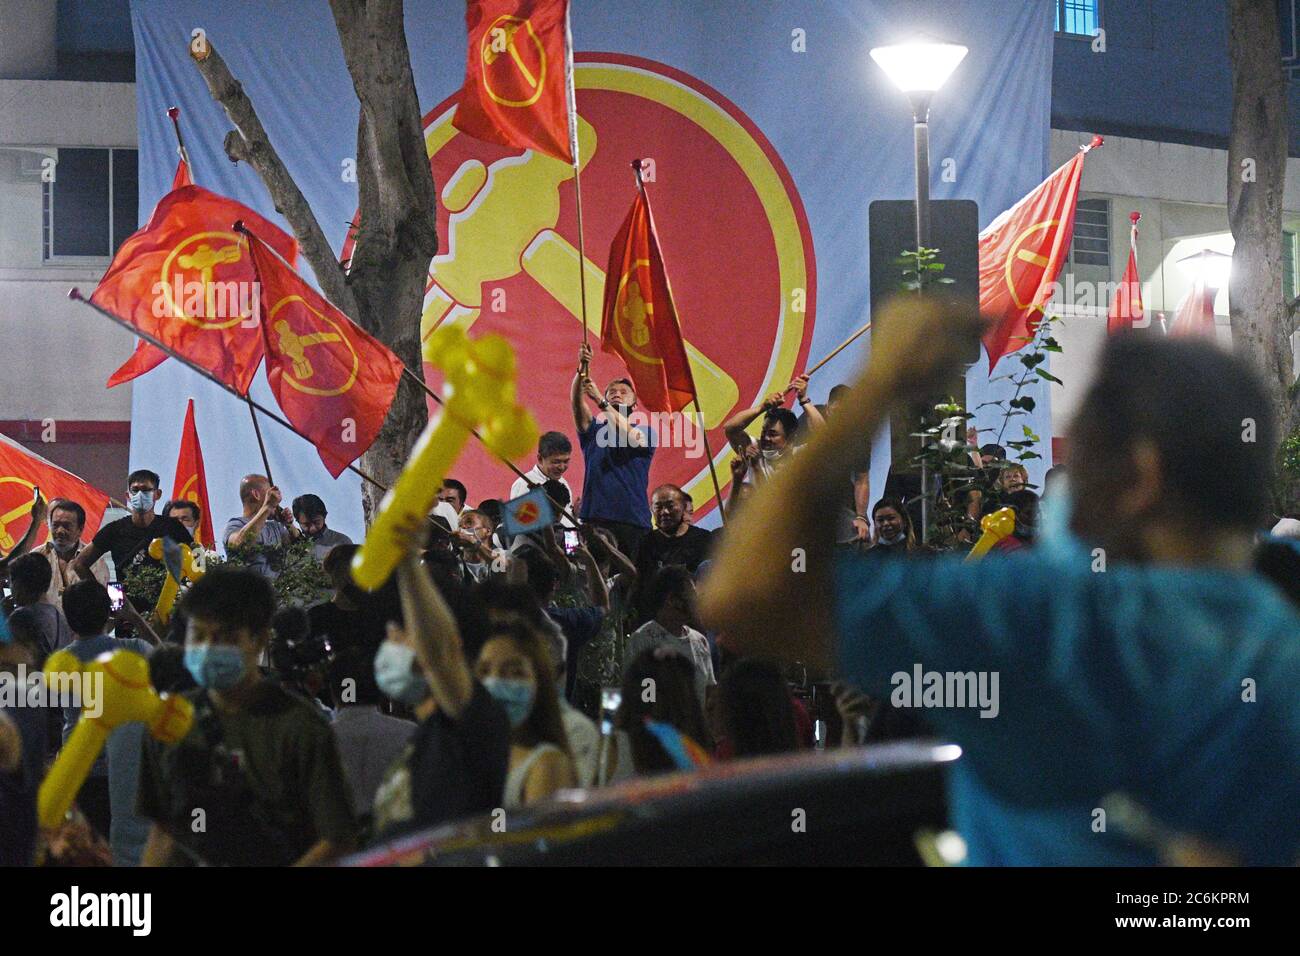 Singapore. 11th July, 2020. Supporters of Singapore's Workers' Party are seen in Singapore, on July 11, 2020. Singapore's ruling People's Action Party (PAP) won 83 of the 93 parliamentary seats in Singapore's general election, Returning Officer Tan Meng Dui said on Saturday. The Workers' Party (WP), which got six seats in the 2015 election, won 10 seats this year. Credit: Then Chih Wey/Xinhua/Alamy Live News Stock Photo